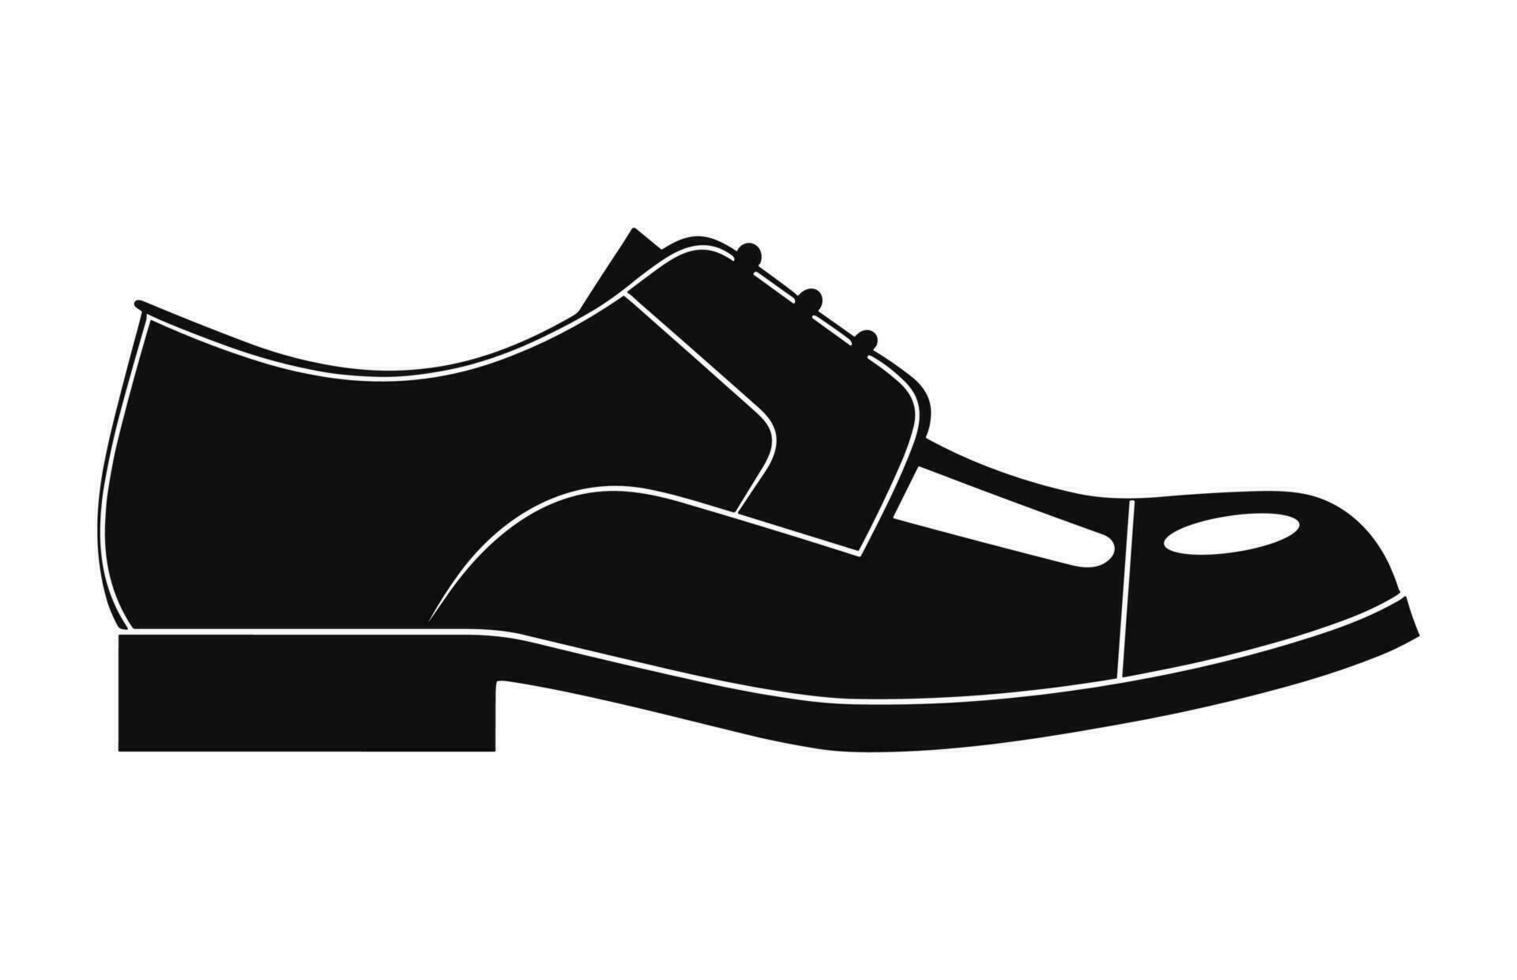 A Male Shoe vector silhouette isolated on a white background